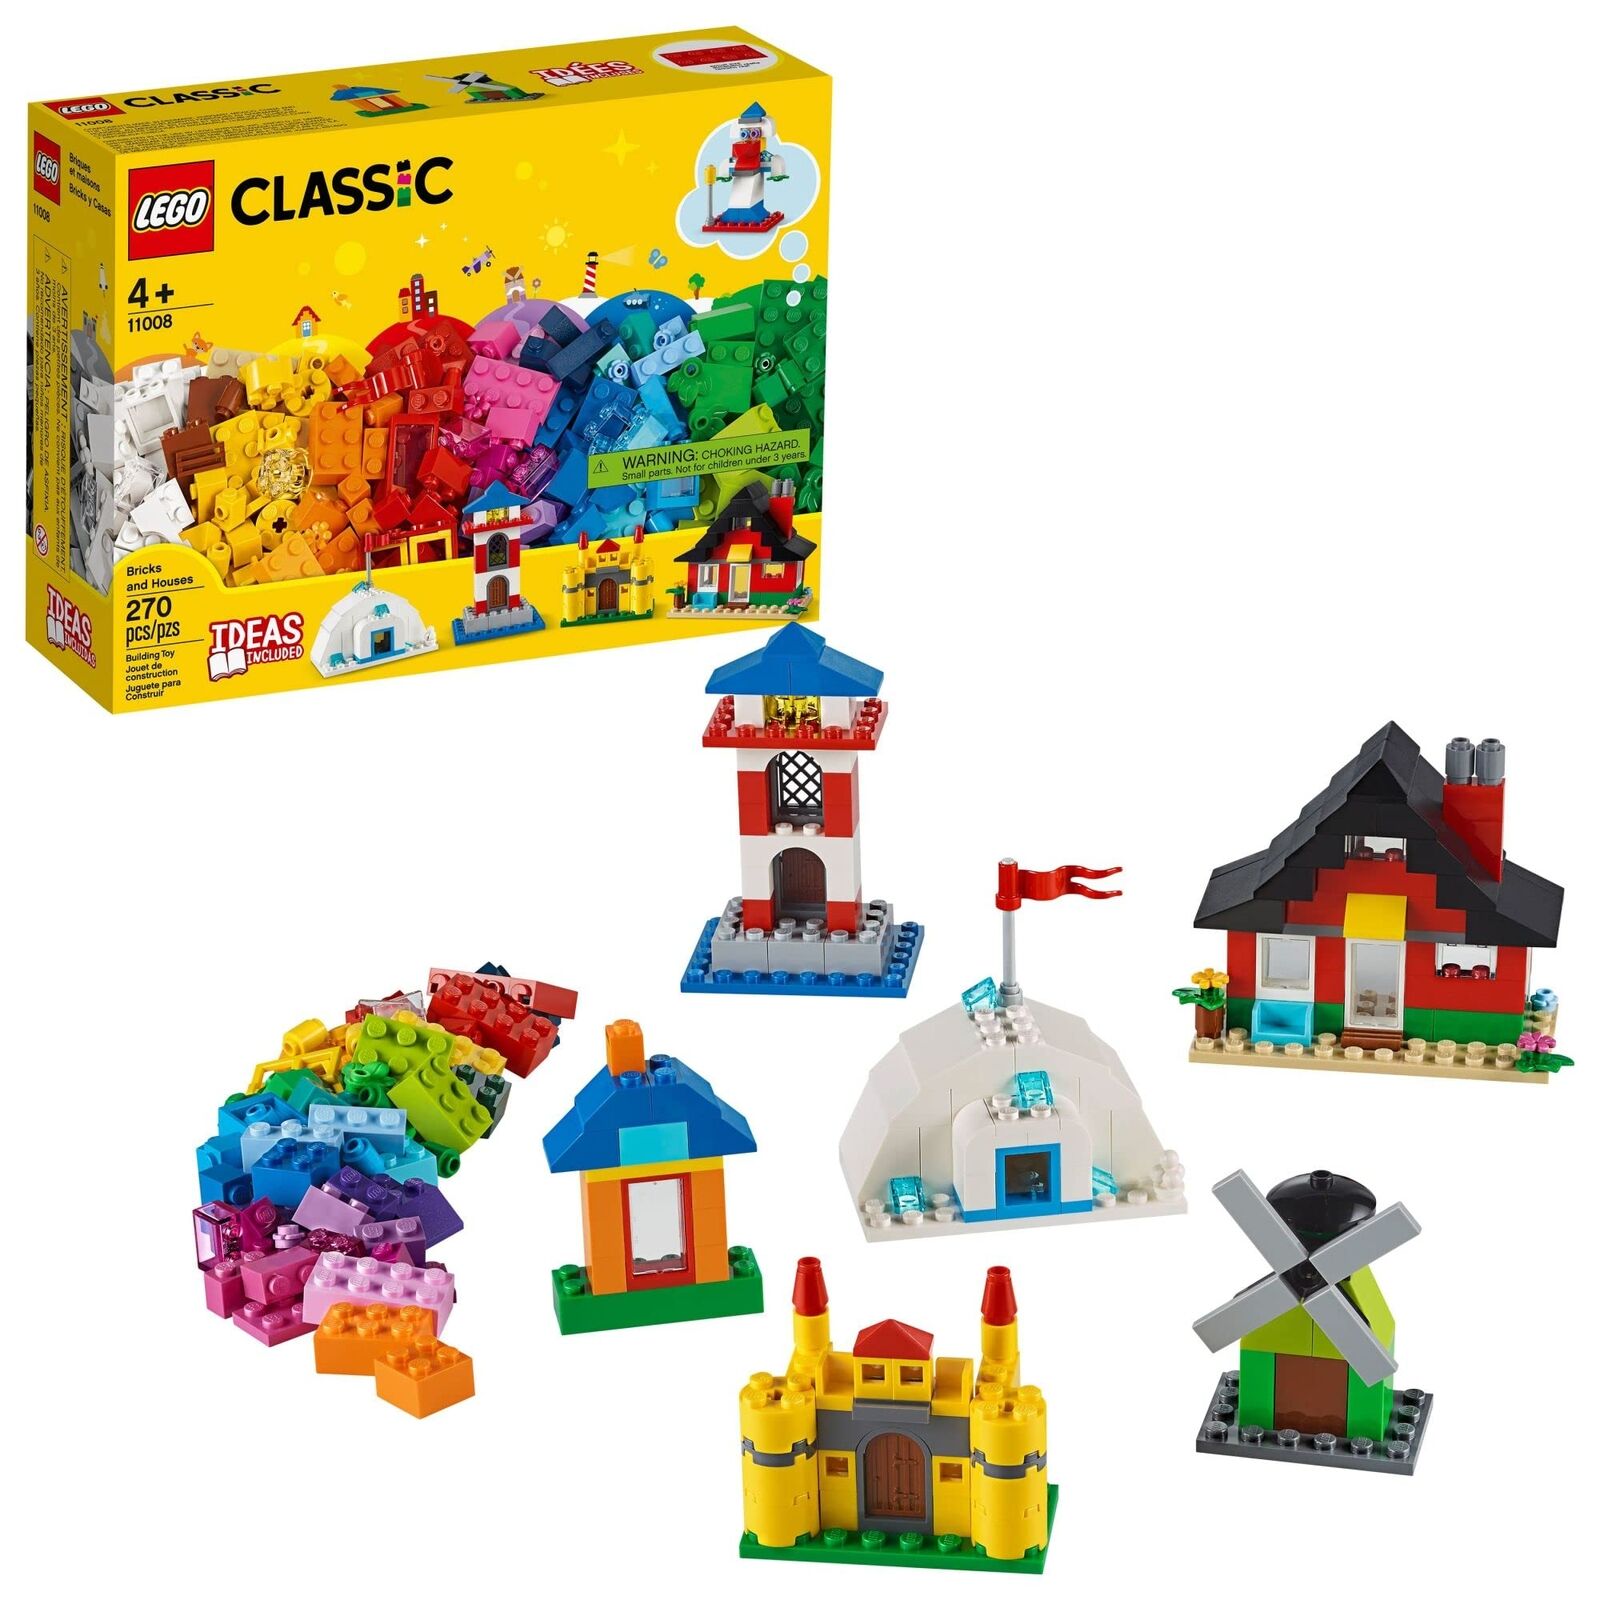 LEGO Classic Bricks and Houses Kids’ Building Toys (270 Pieces)